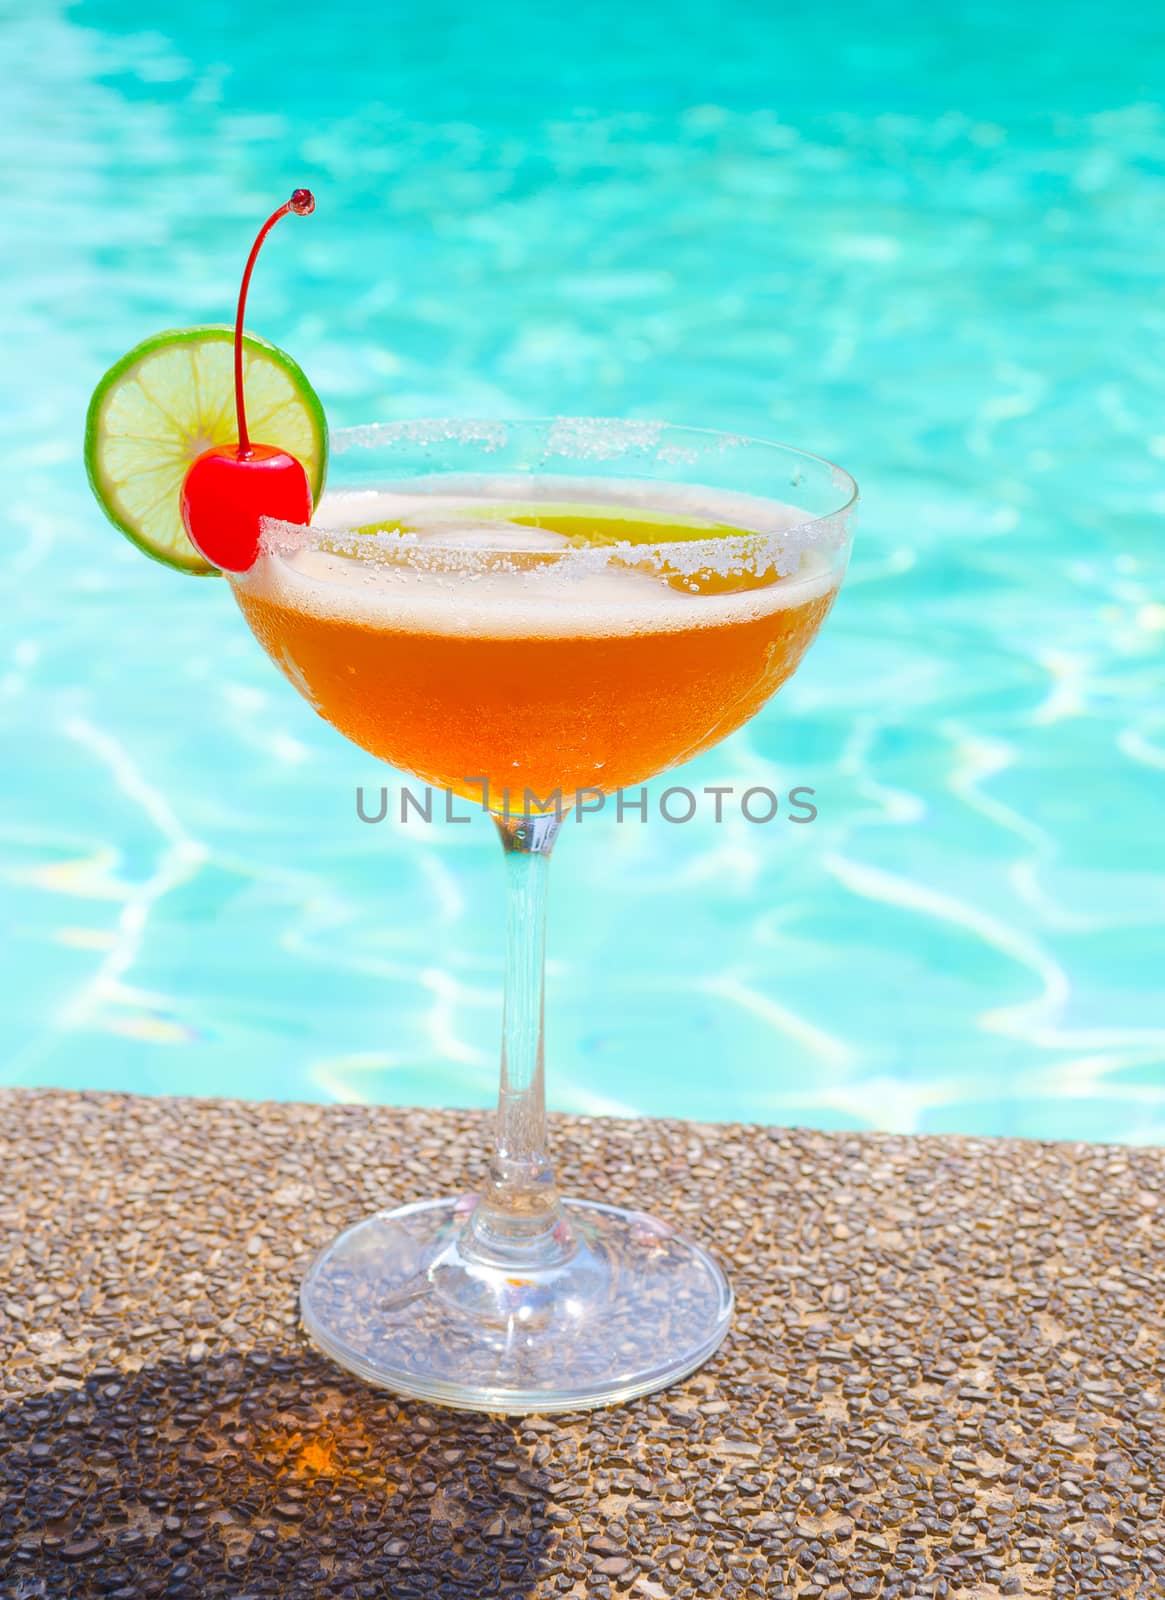 Cocktails near the swimming pool on summer by nopparats